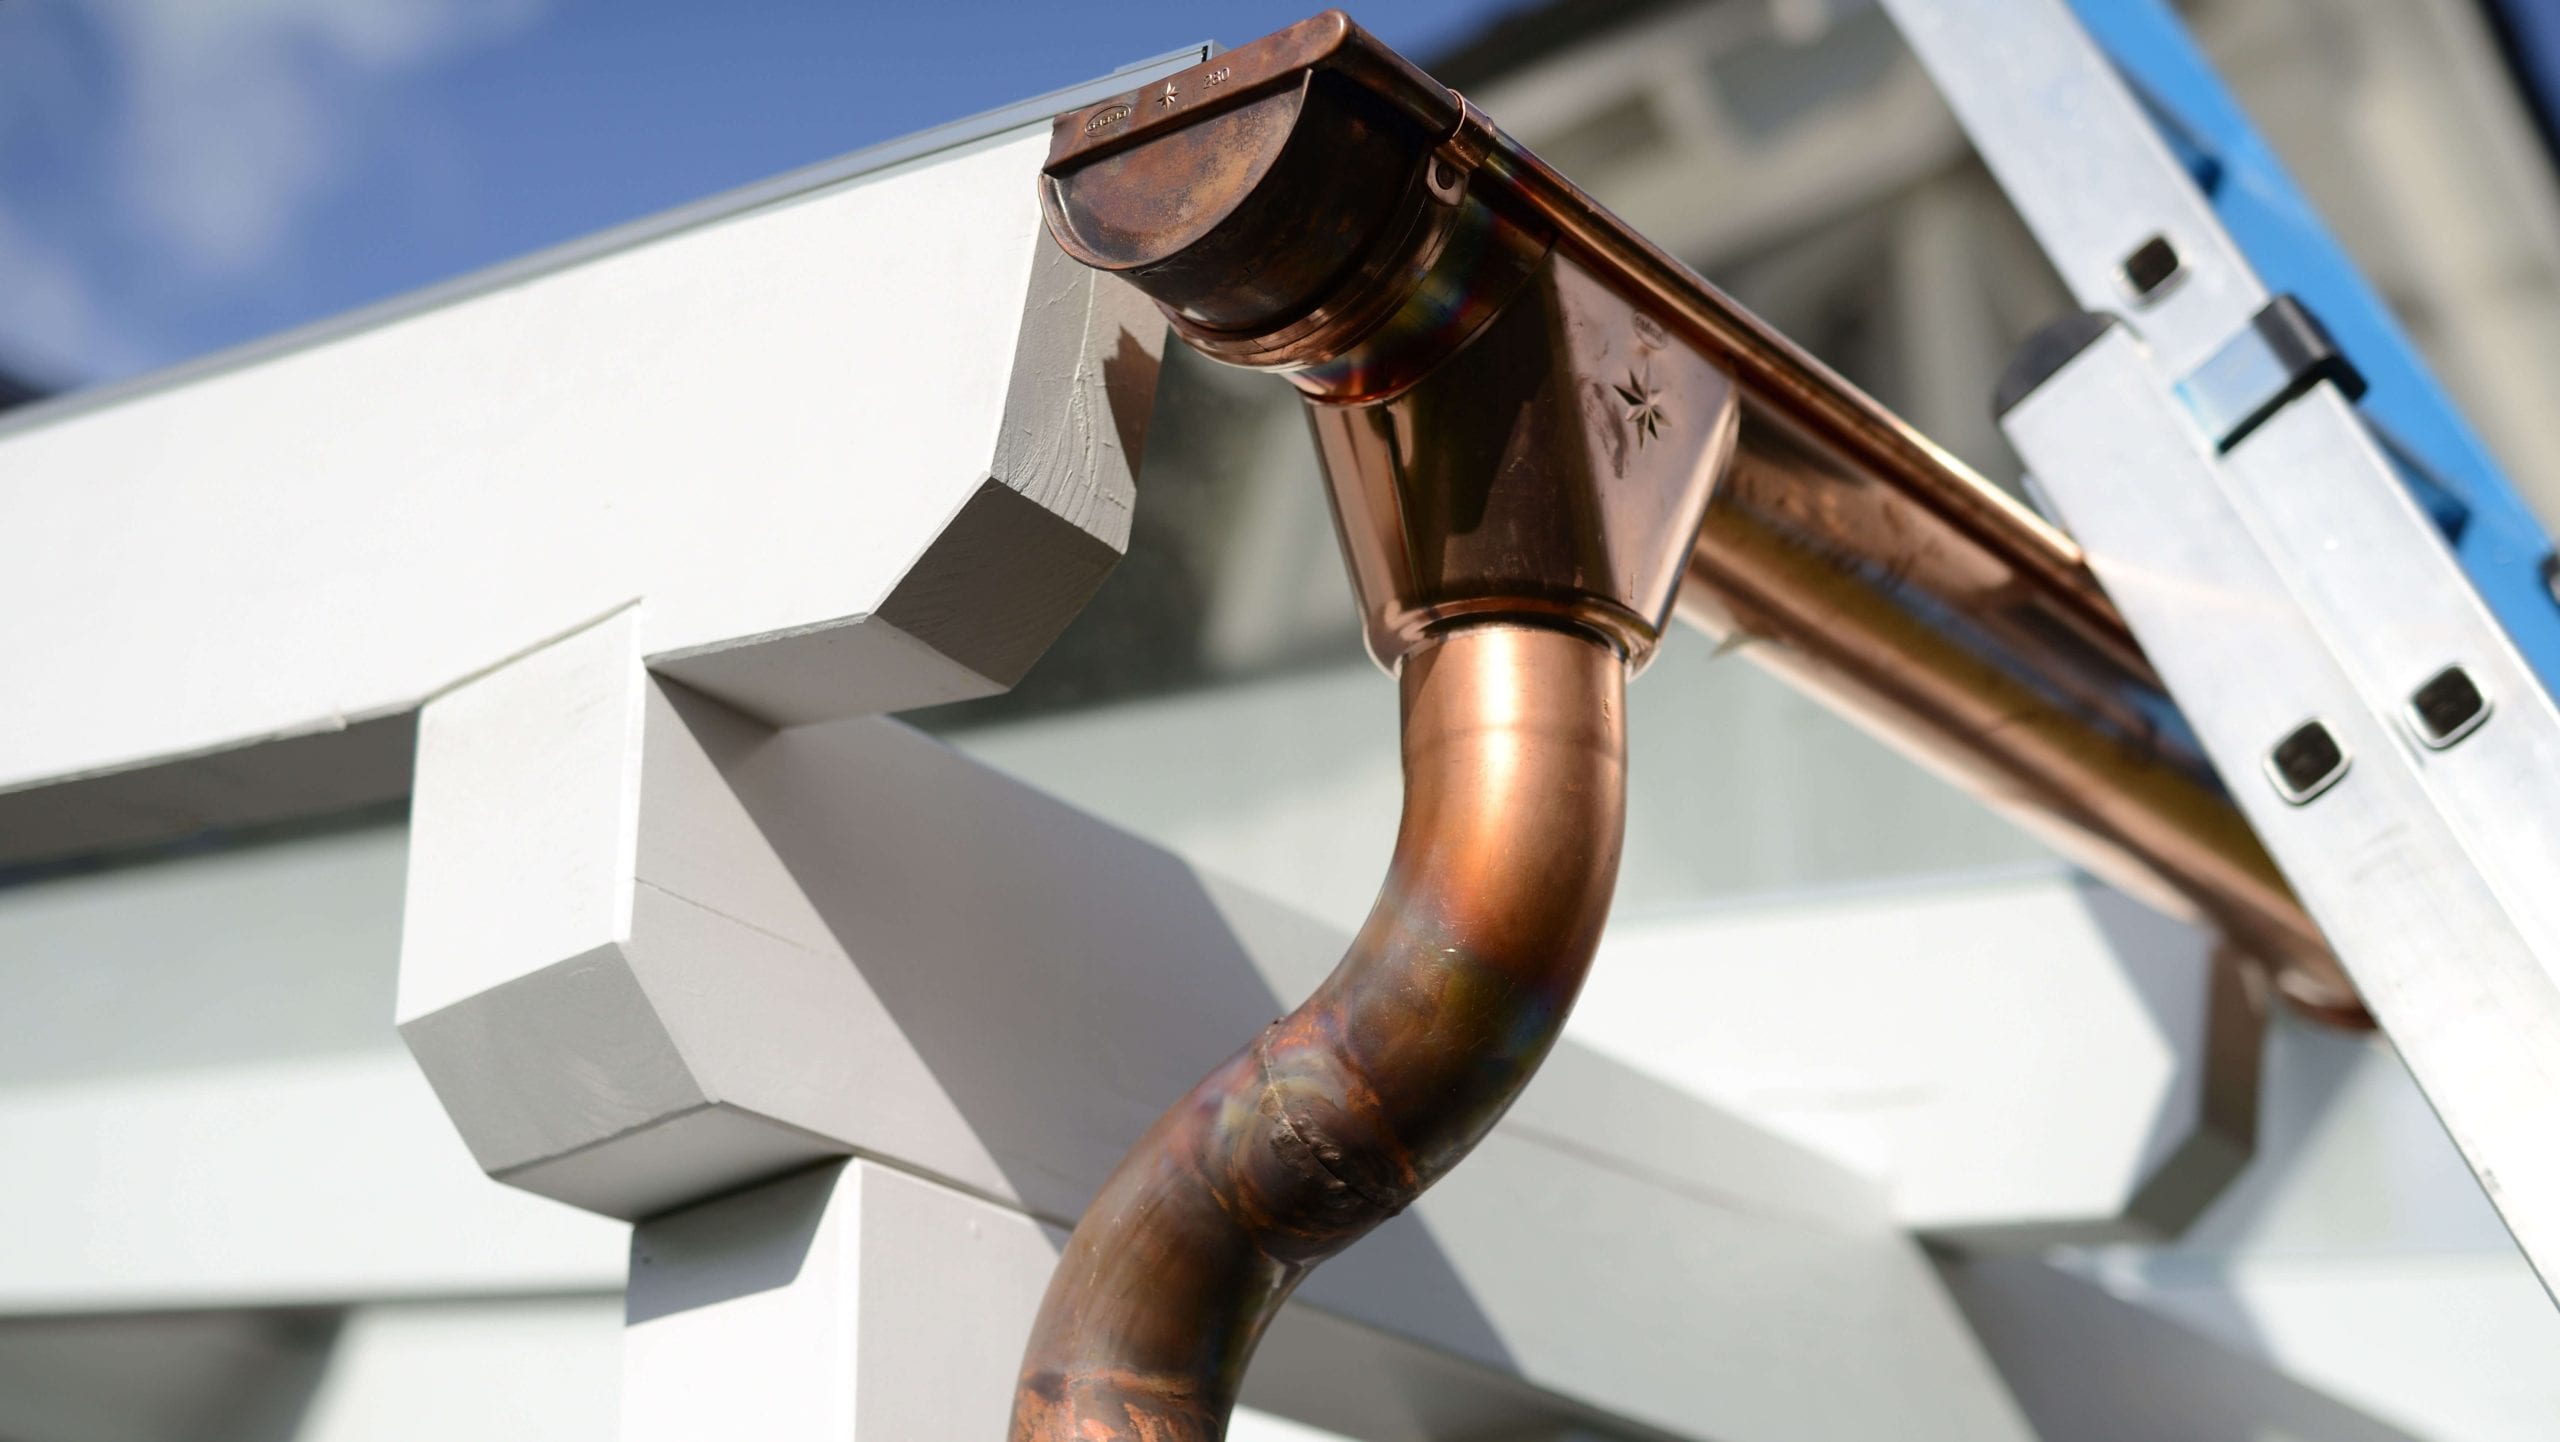 Make your property stand out with copper gutters. Contact for gutter installation in Minneapolis